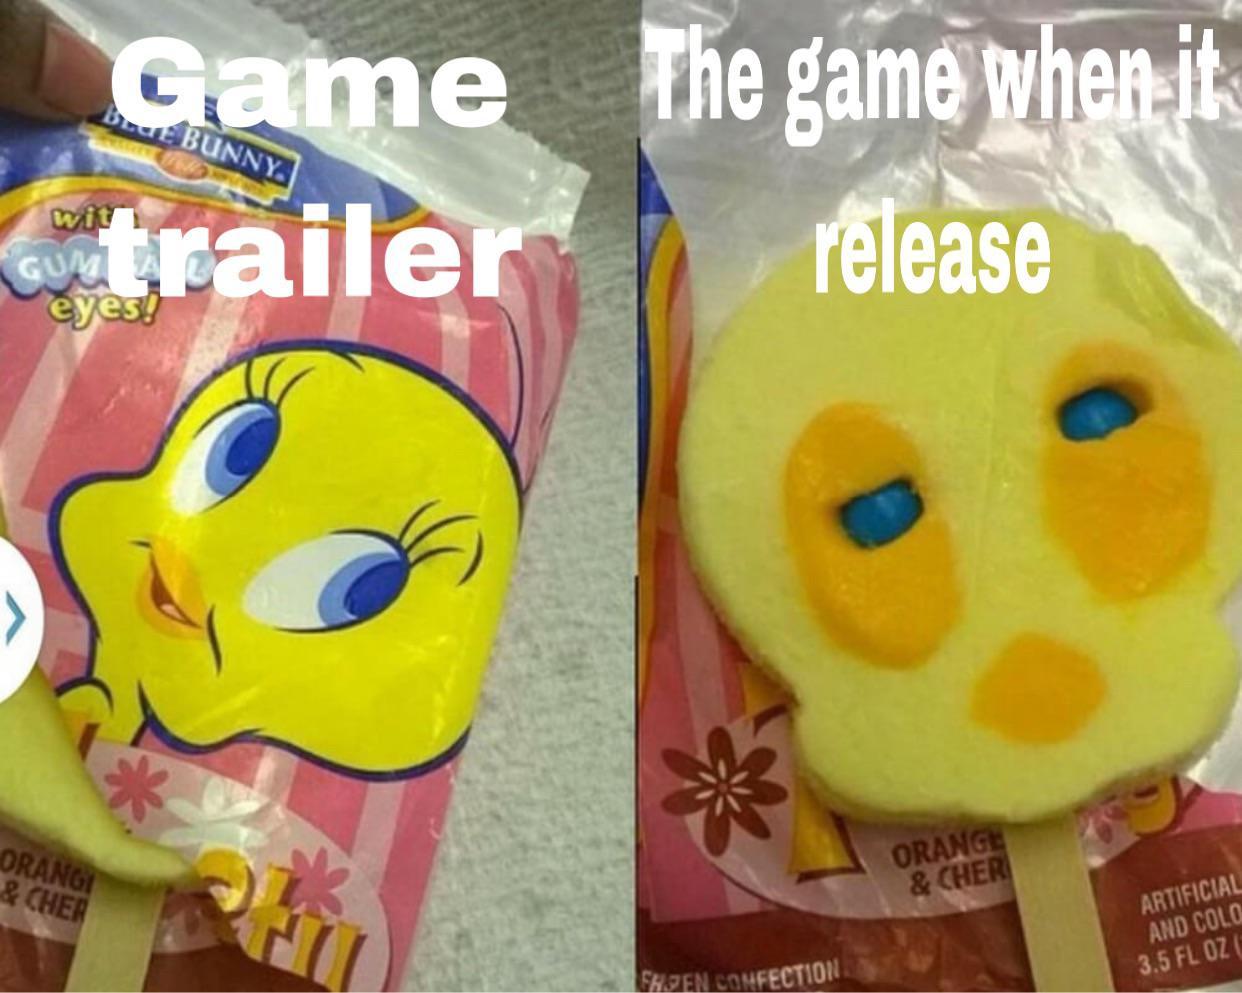 funny gaming memes - instagram vs reality food meme - Brut Bunny Game The game when it cutrailer release eyes! Orange & Cher Orange & Cher Artificial And Colo 3.5 Fl Oze Een Comfection